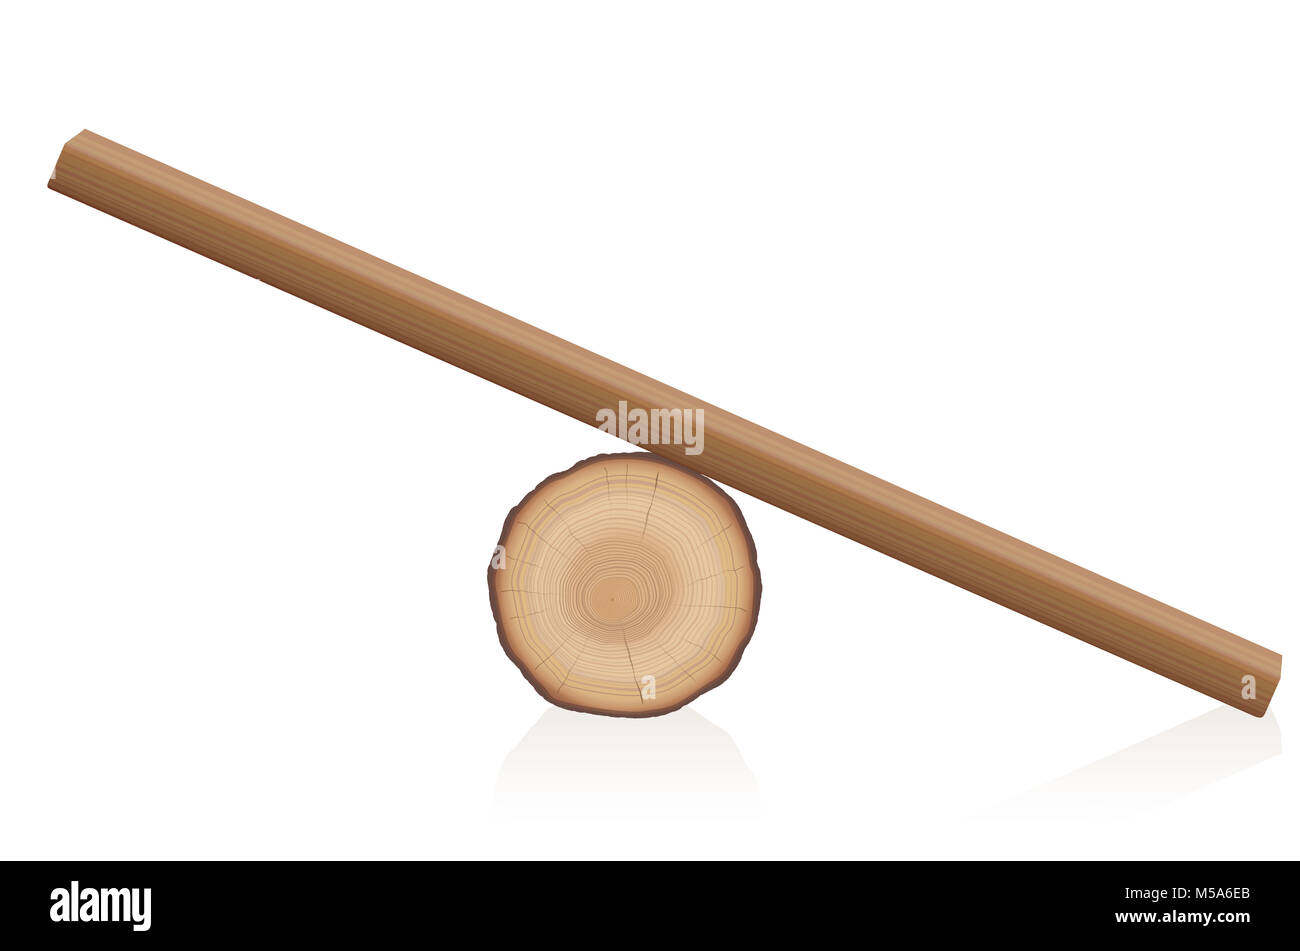 Wooden balance toy. Simple rustic seesaw constructed of a lying tree trunk and a wooden plank - isolated vector illustration on white background. Stock Photo